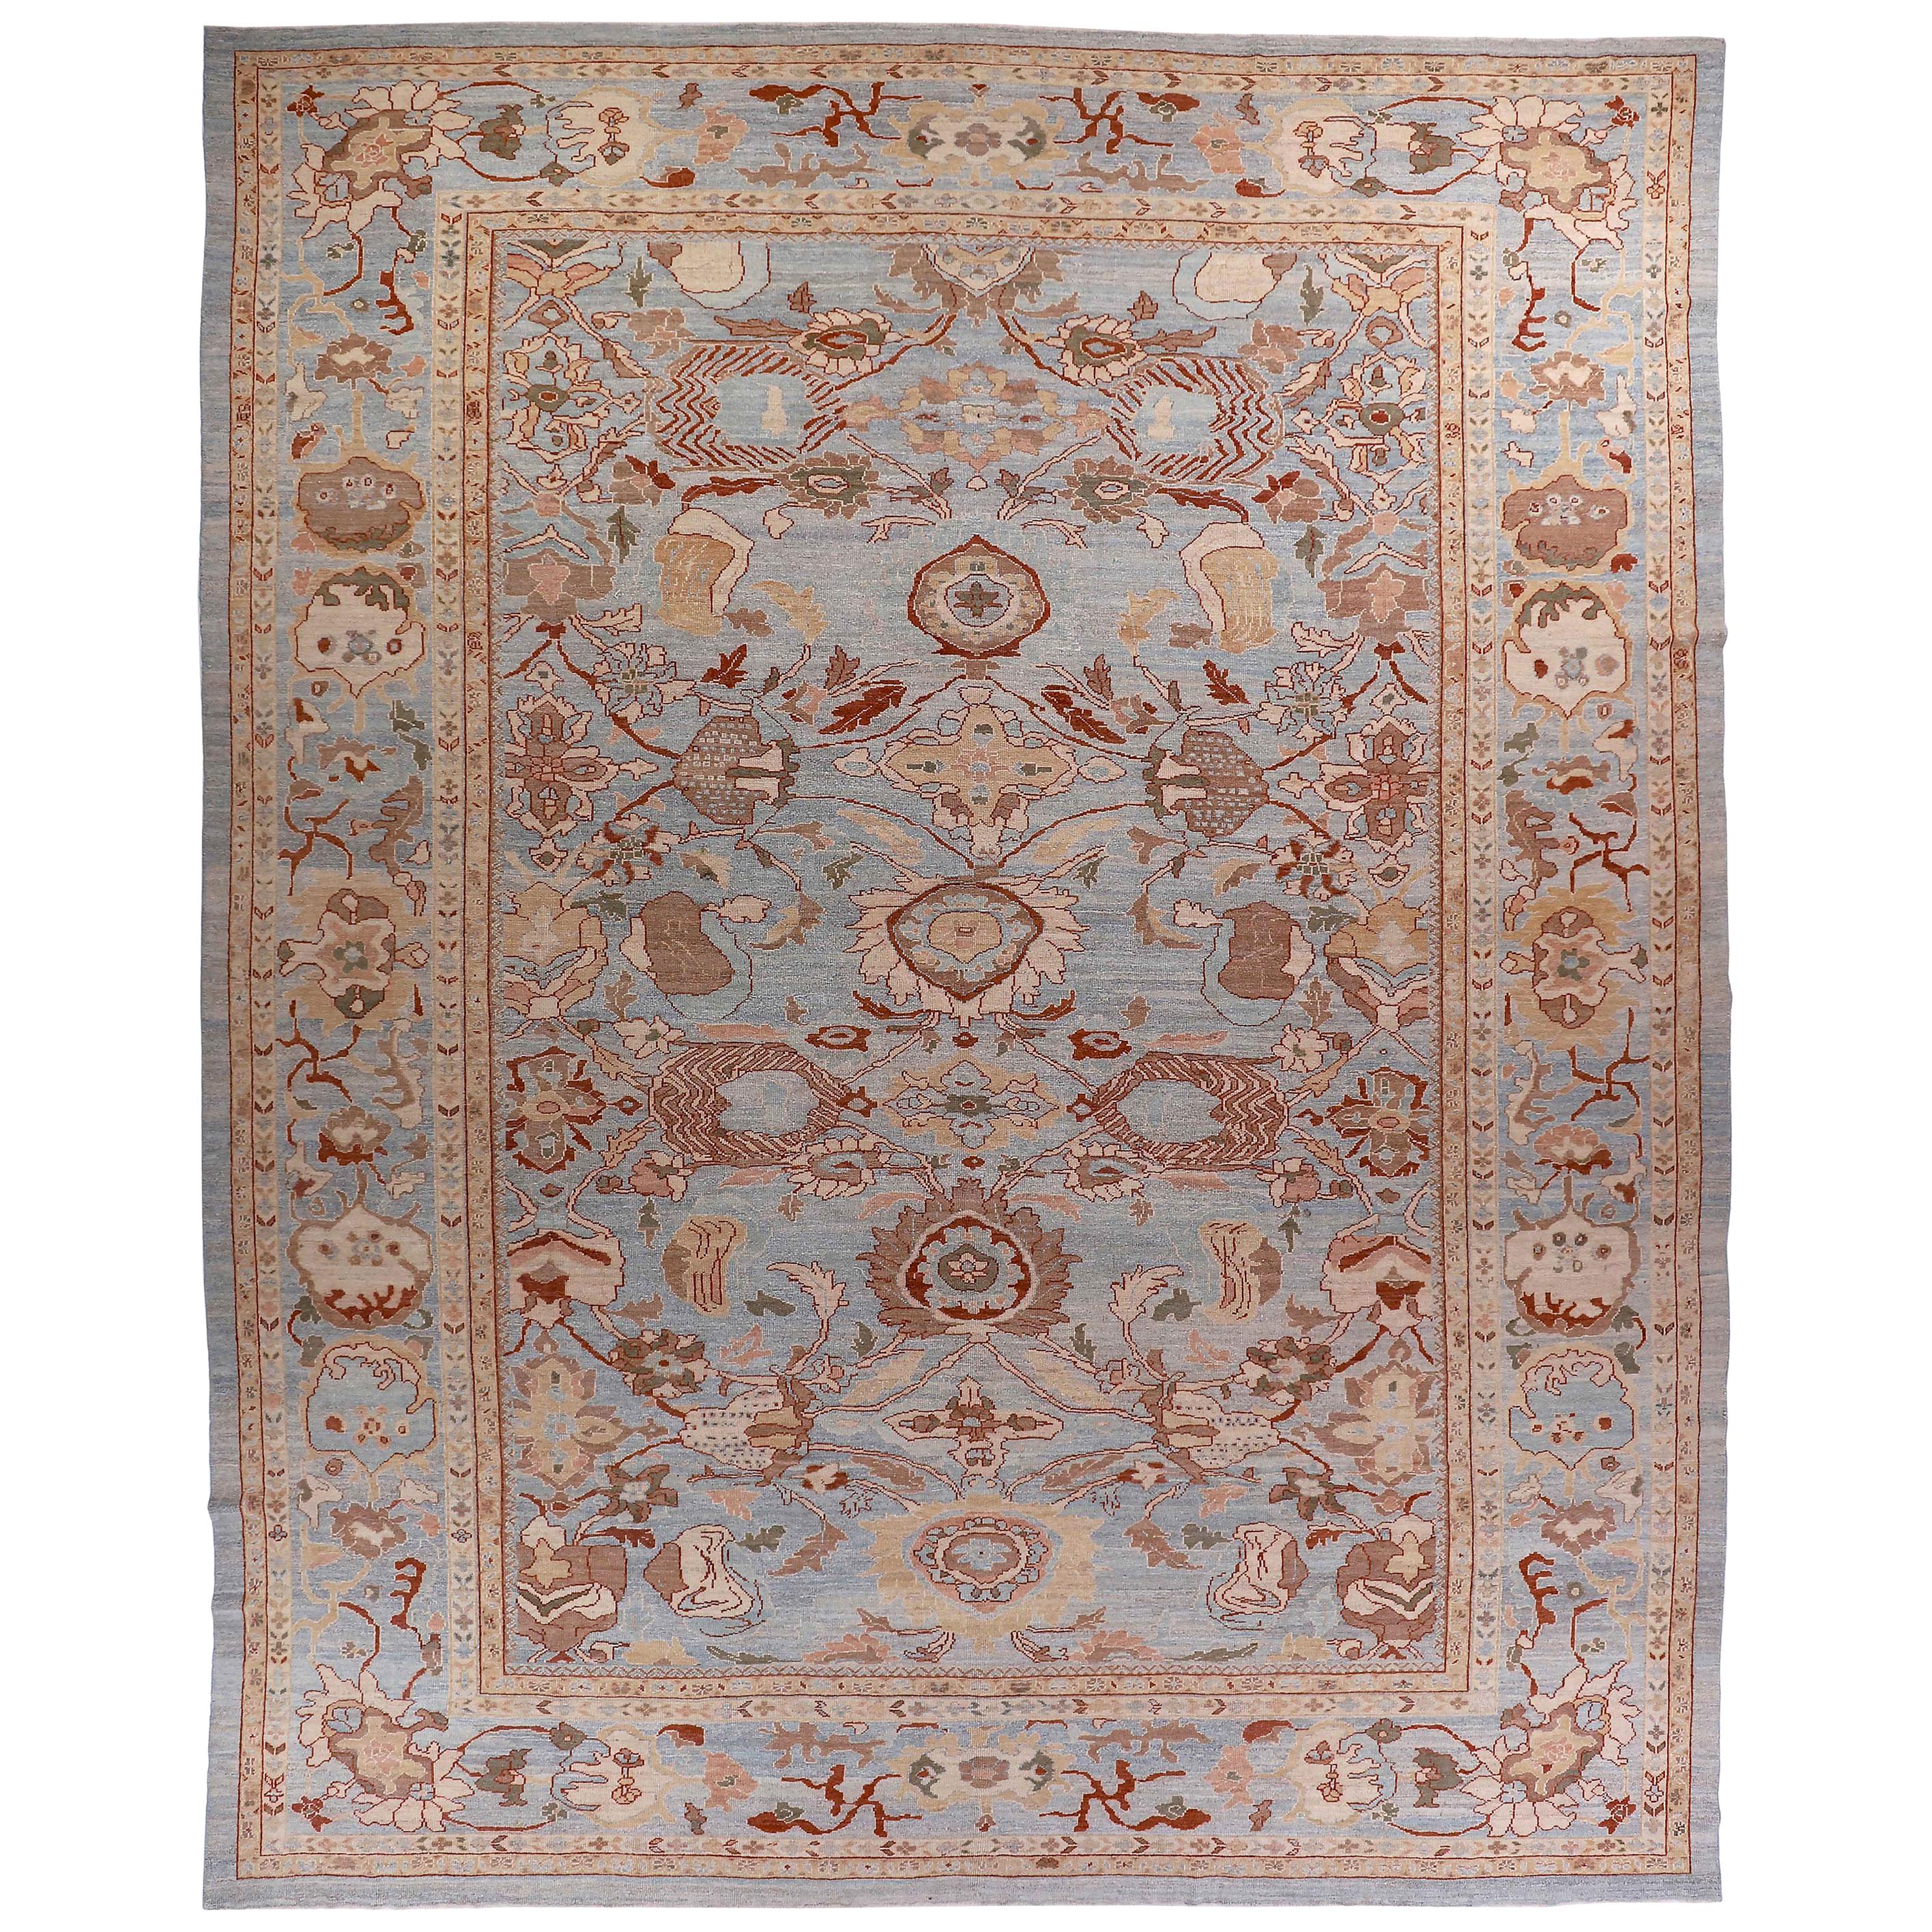 Large Persian Oushak Style Rug with Beige & Brown Floral Patterns on Blue Field